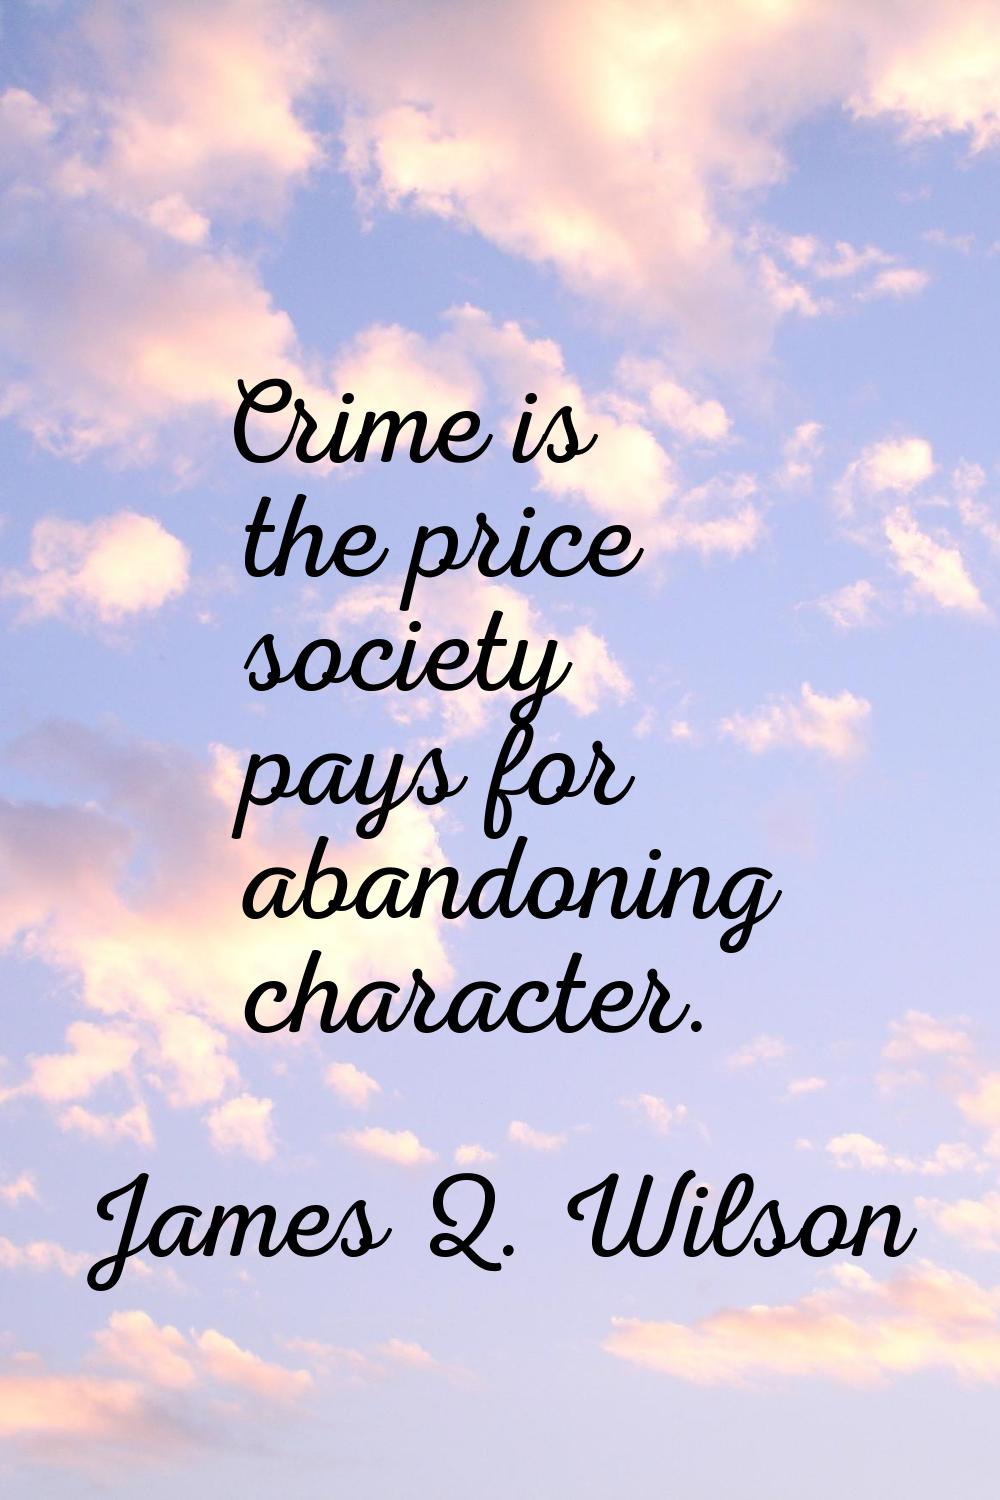 Crime is the price society pays for abandoning character.